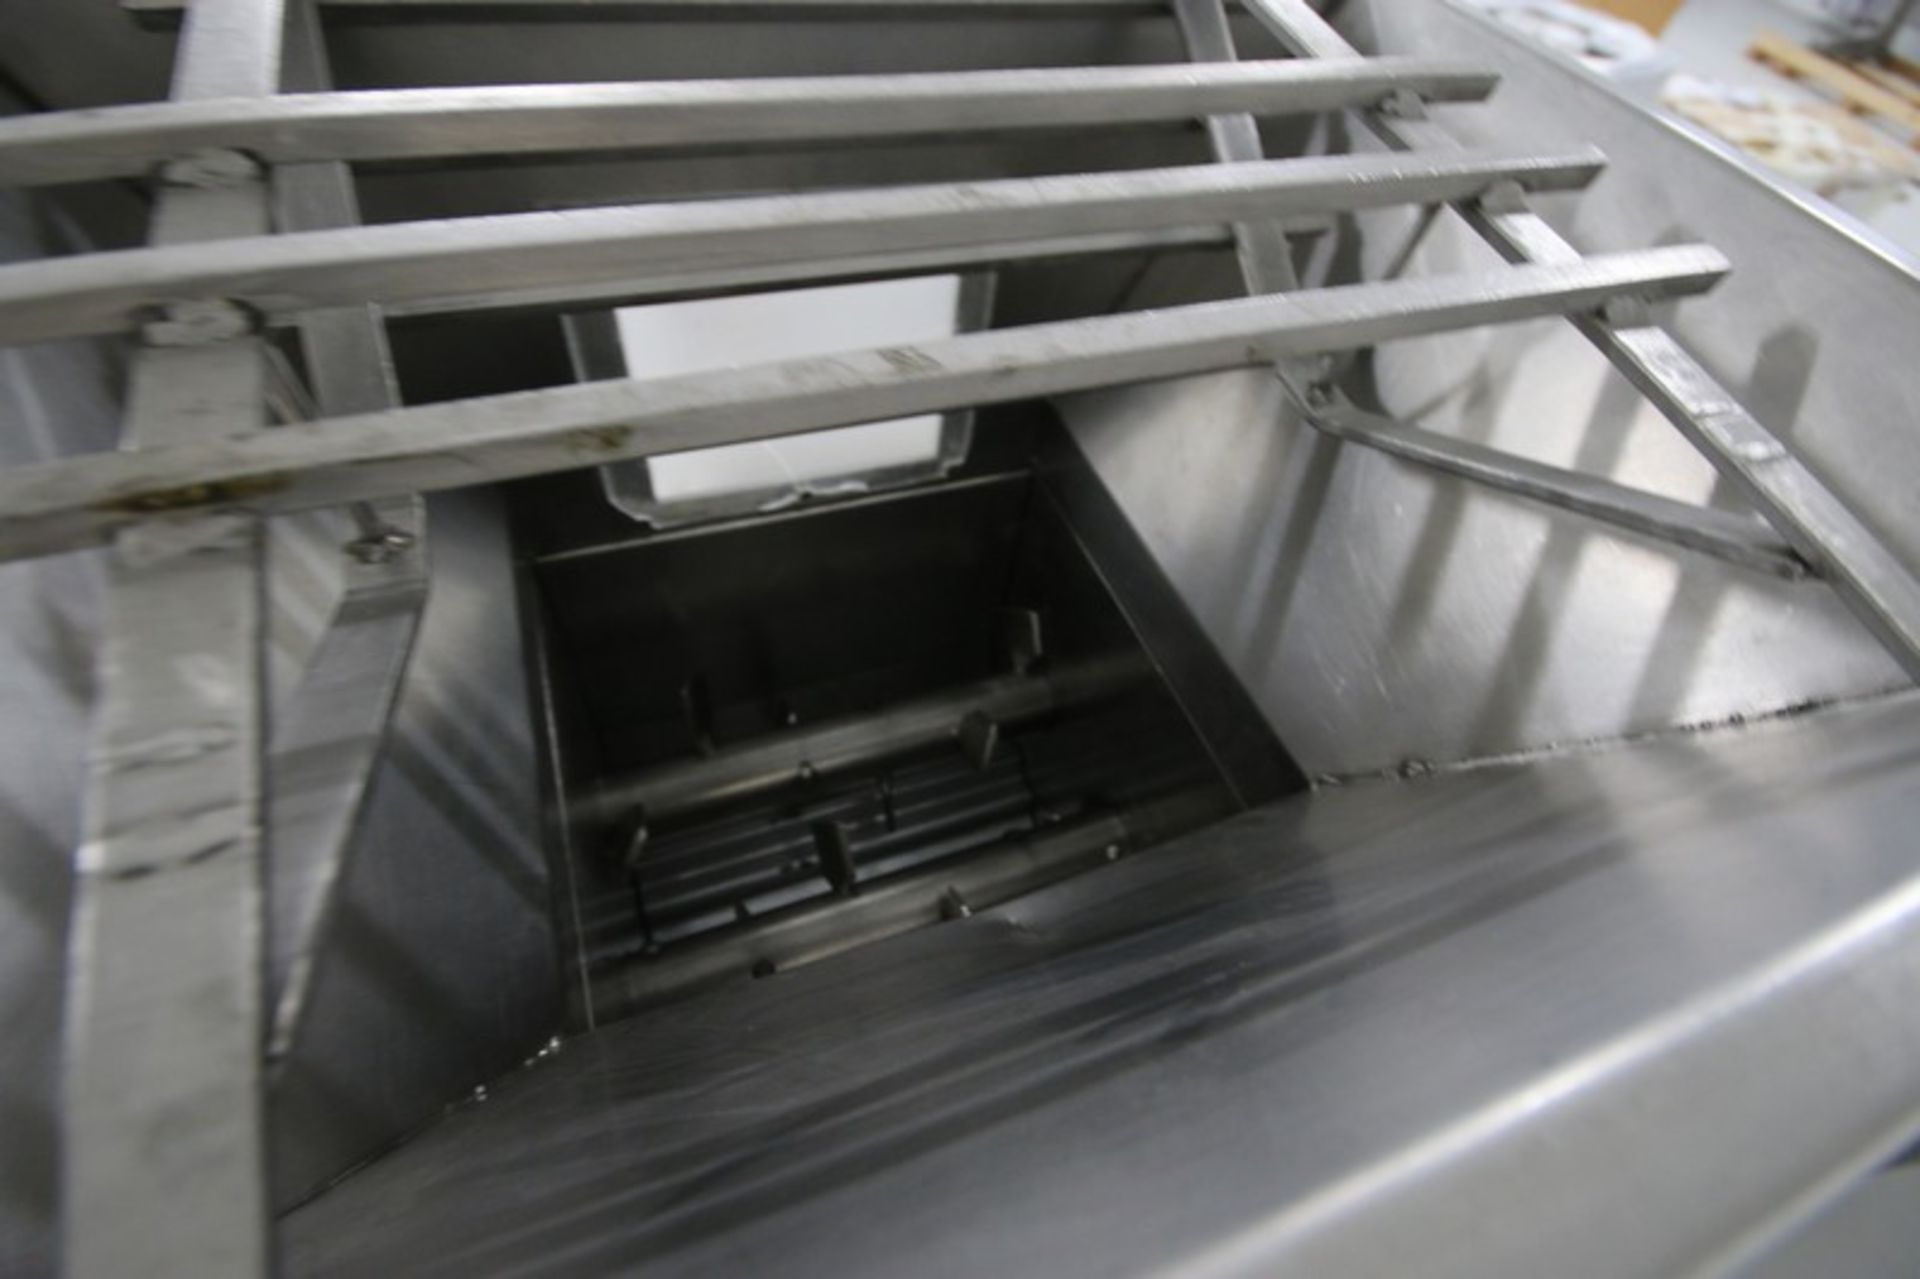 Toresani Pasta Sheeter/Laminator, M/N SFA300A, 220 Volts, 3 Phase, with Outfeed Conveyor, Mounted on - Image 6 of 6